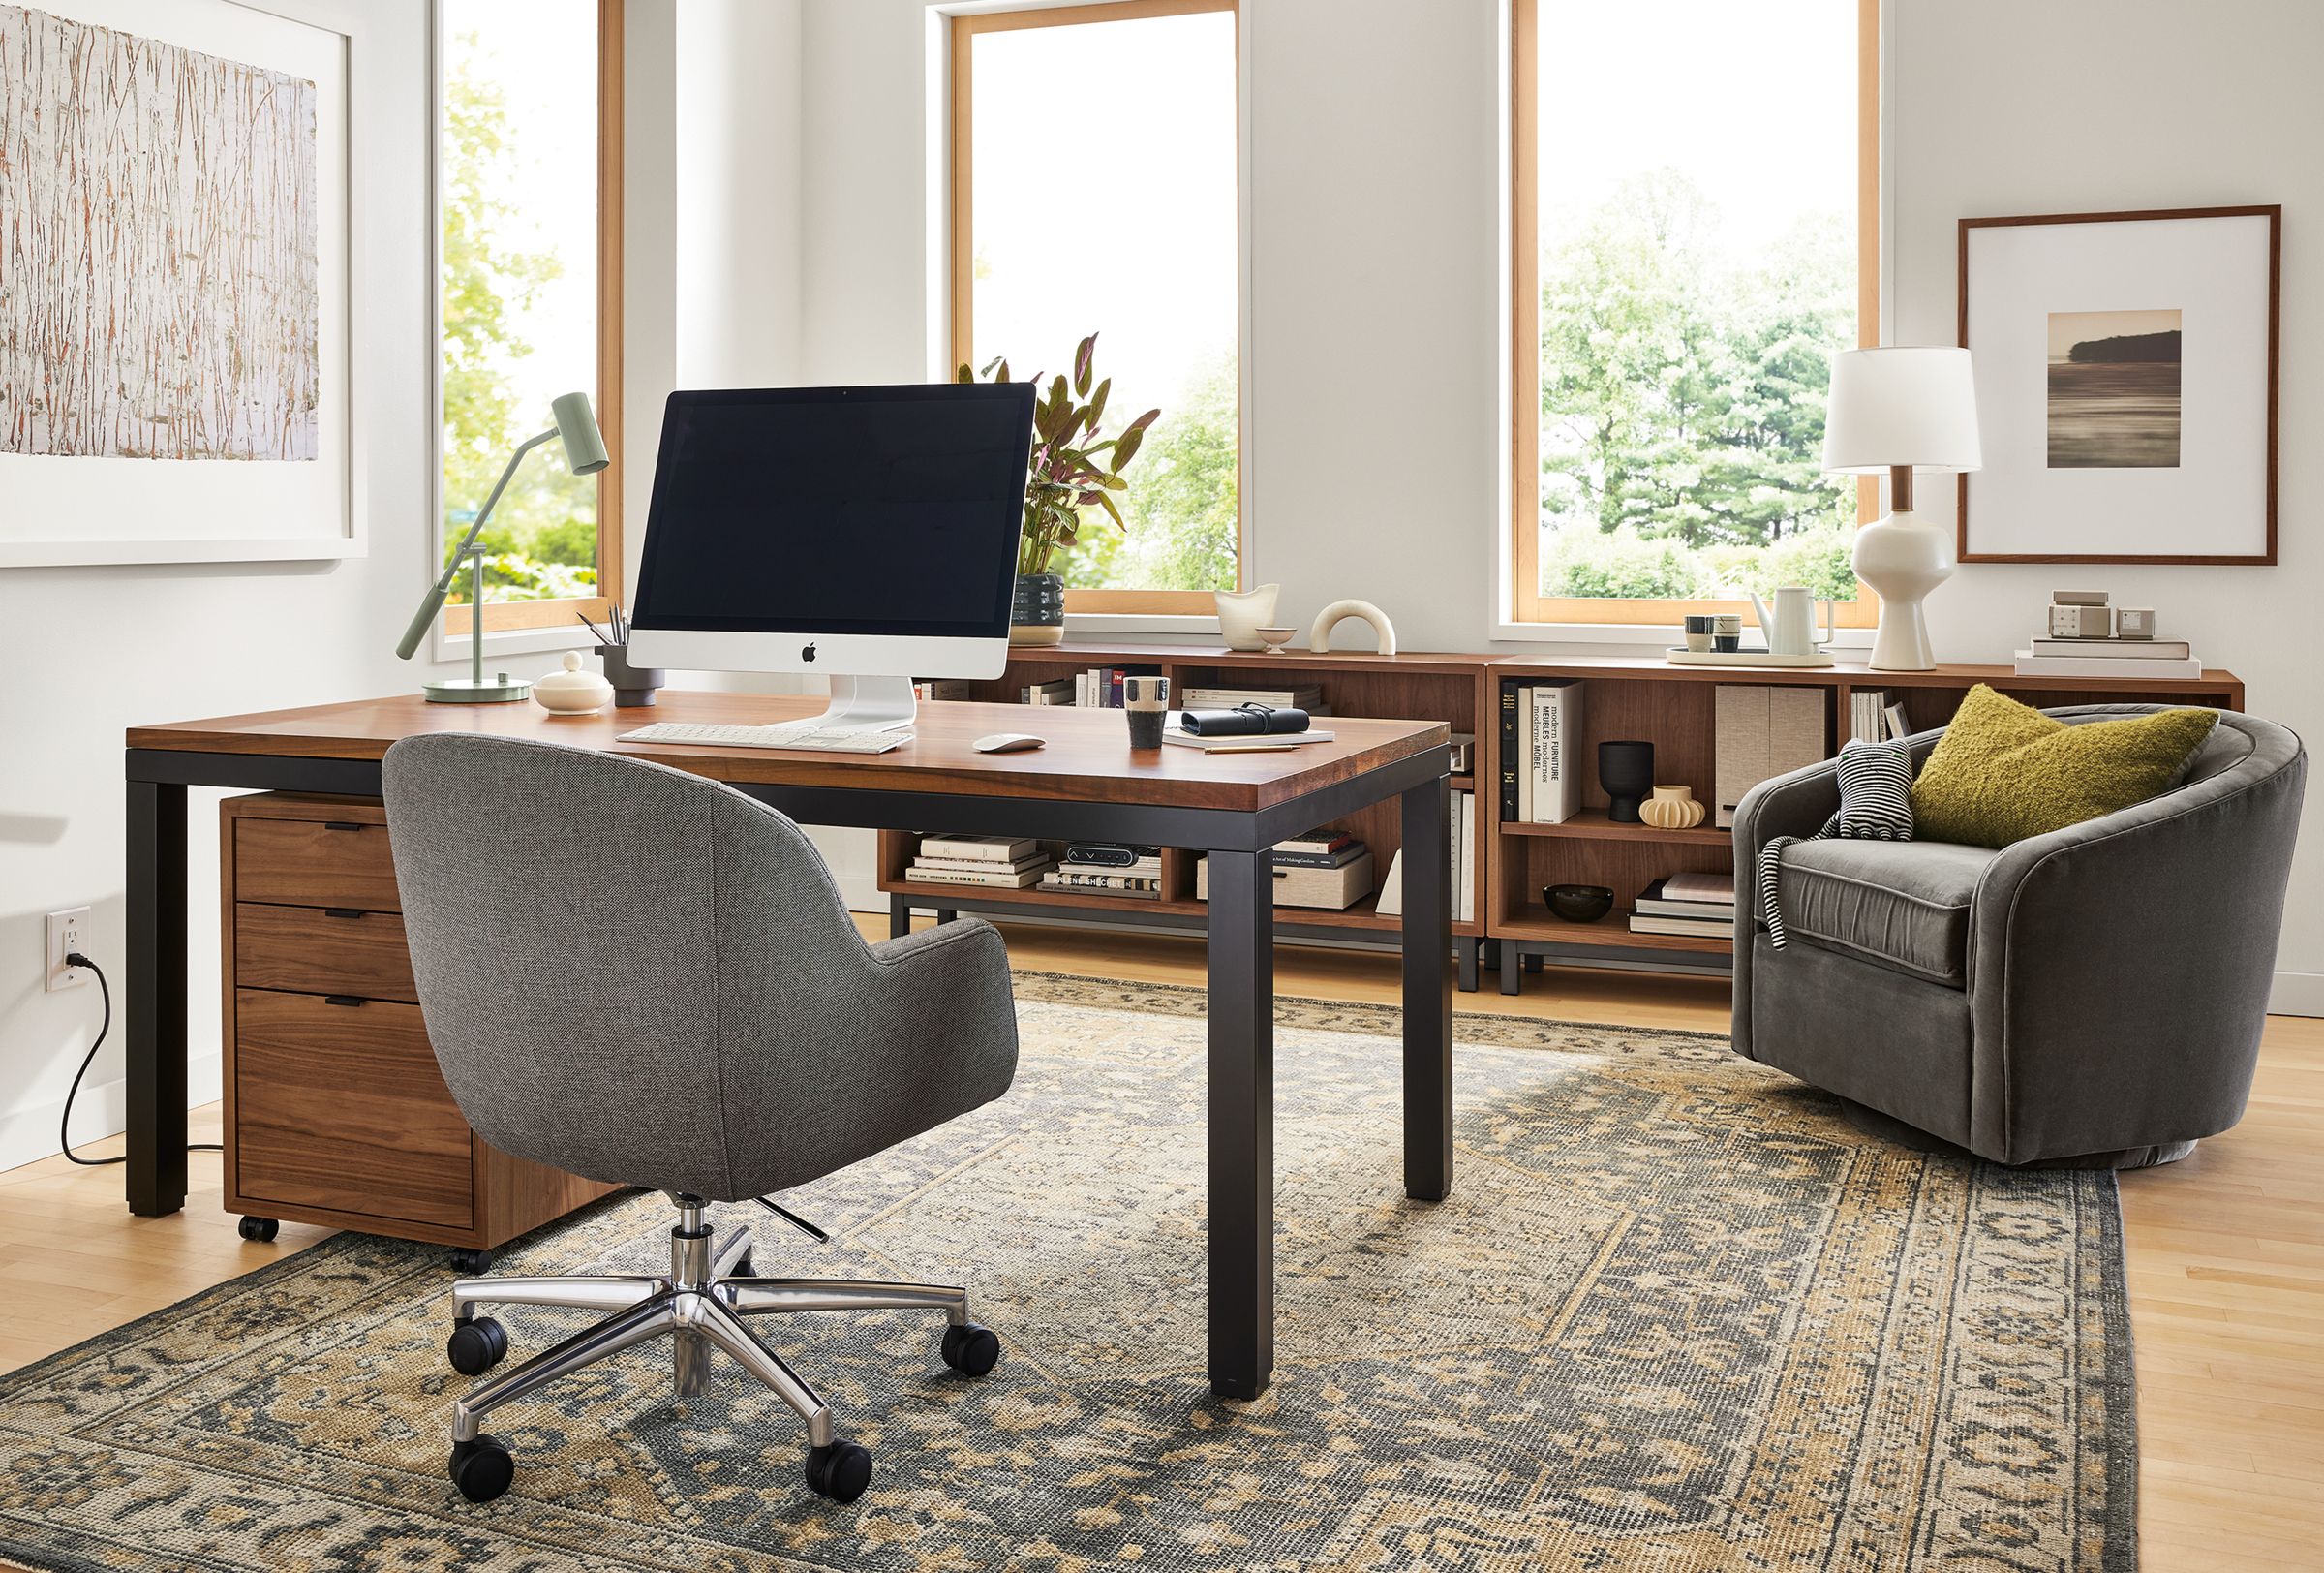 Office area with Parsons Adjustable height standing desk in graphite and walnut in seated position, Nico office chair and Veda rug.